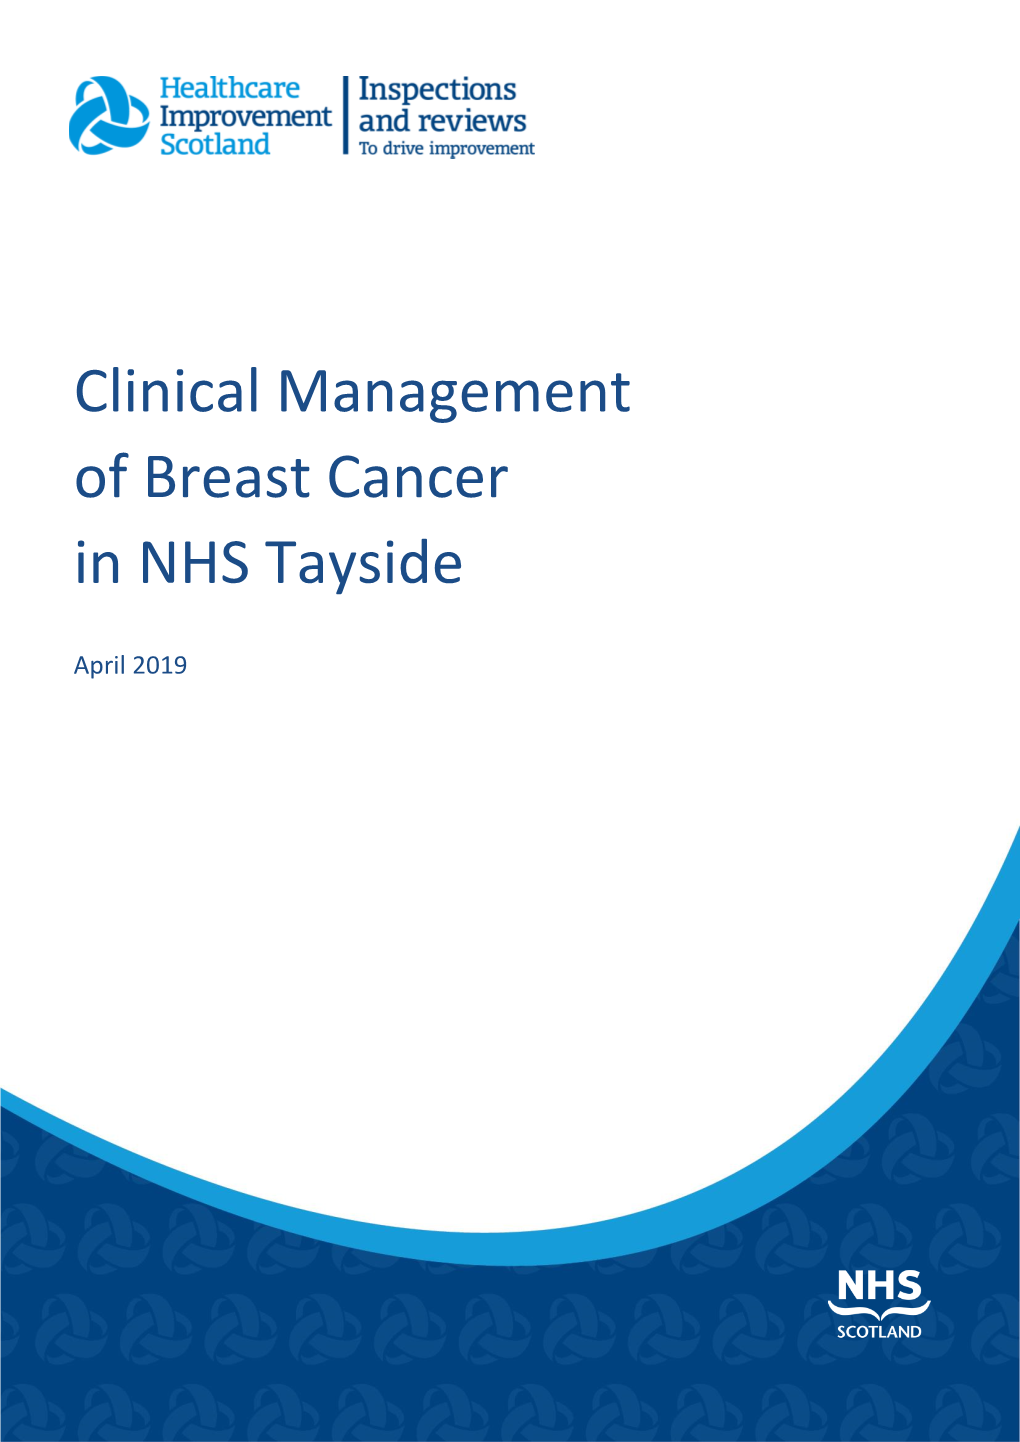 Clinical Management of Breast Cancer in NHS Tayside